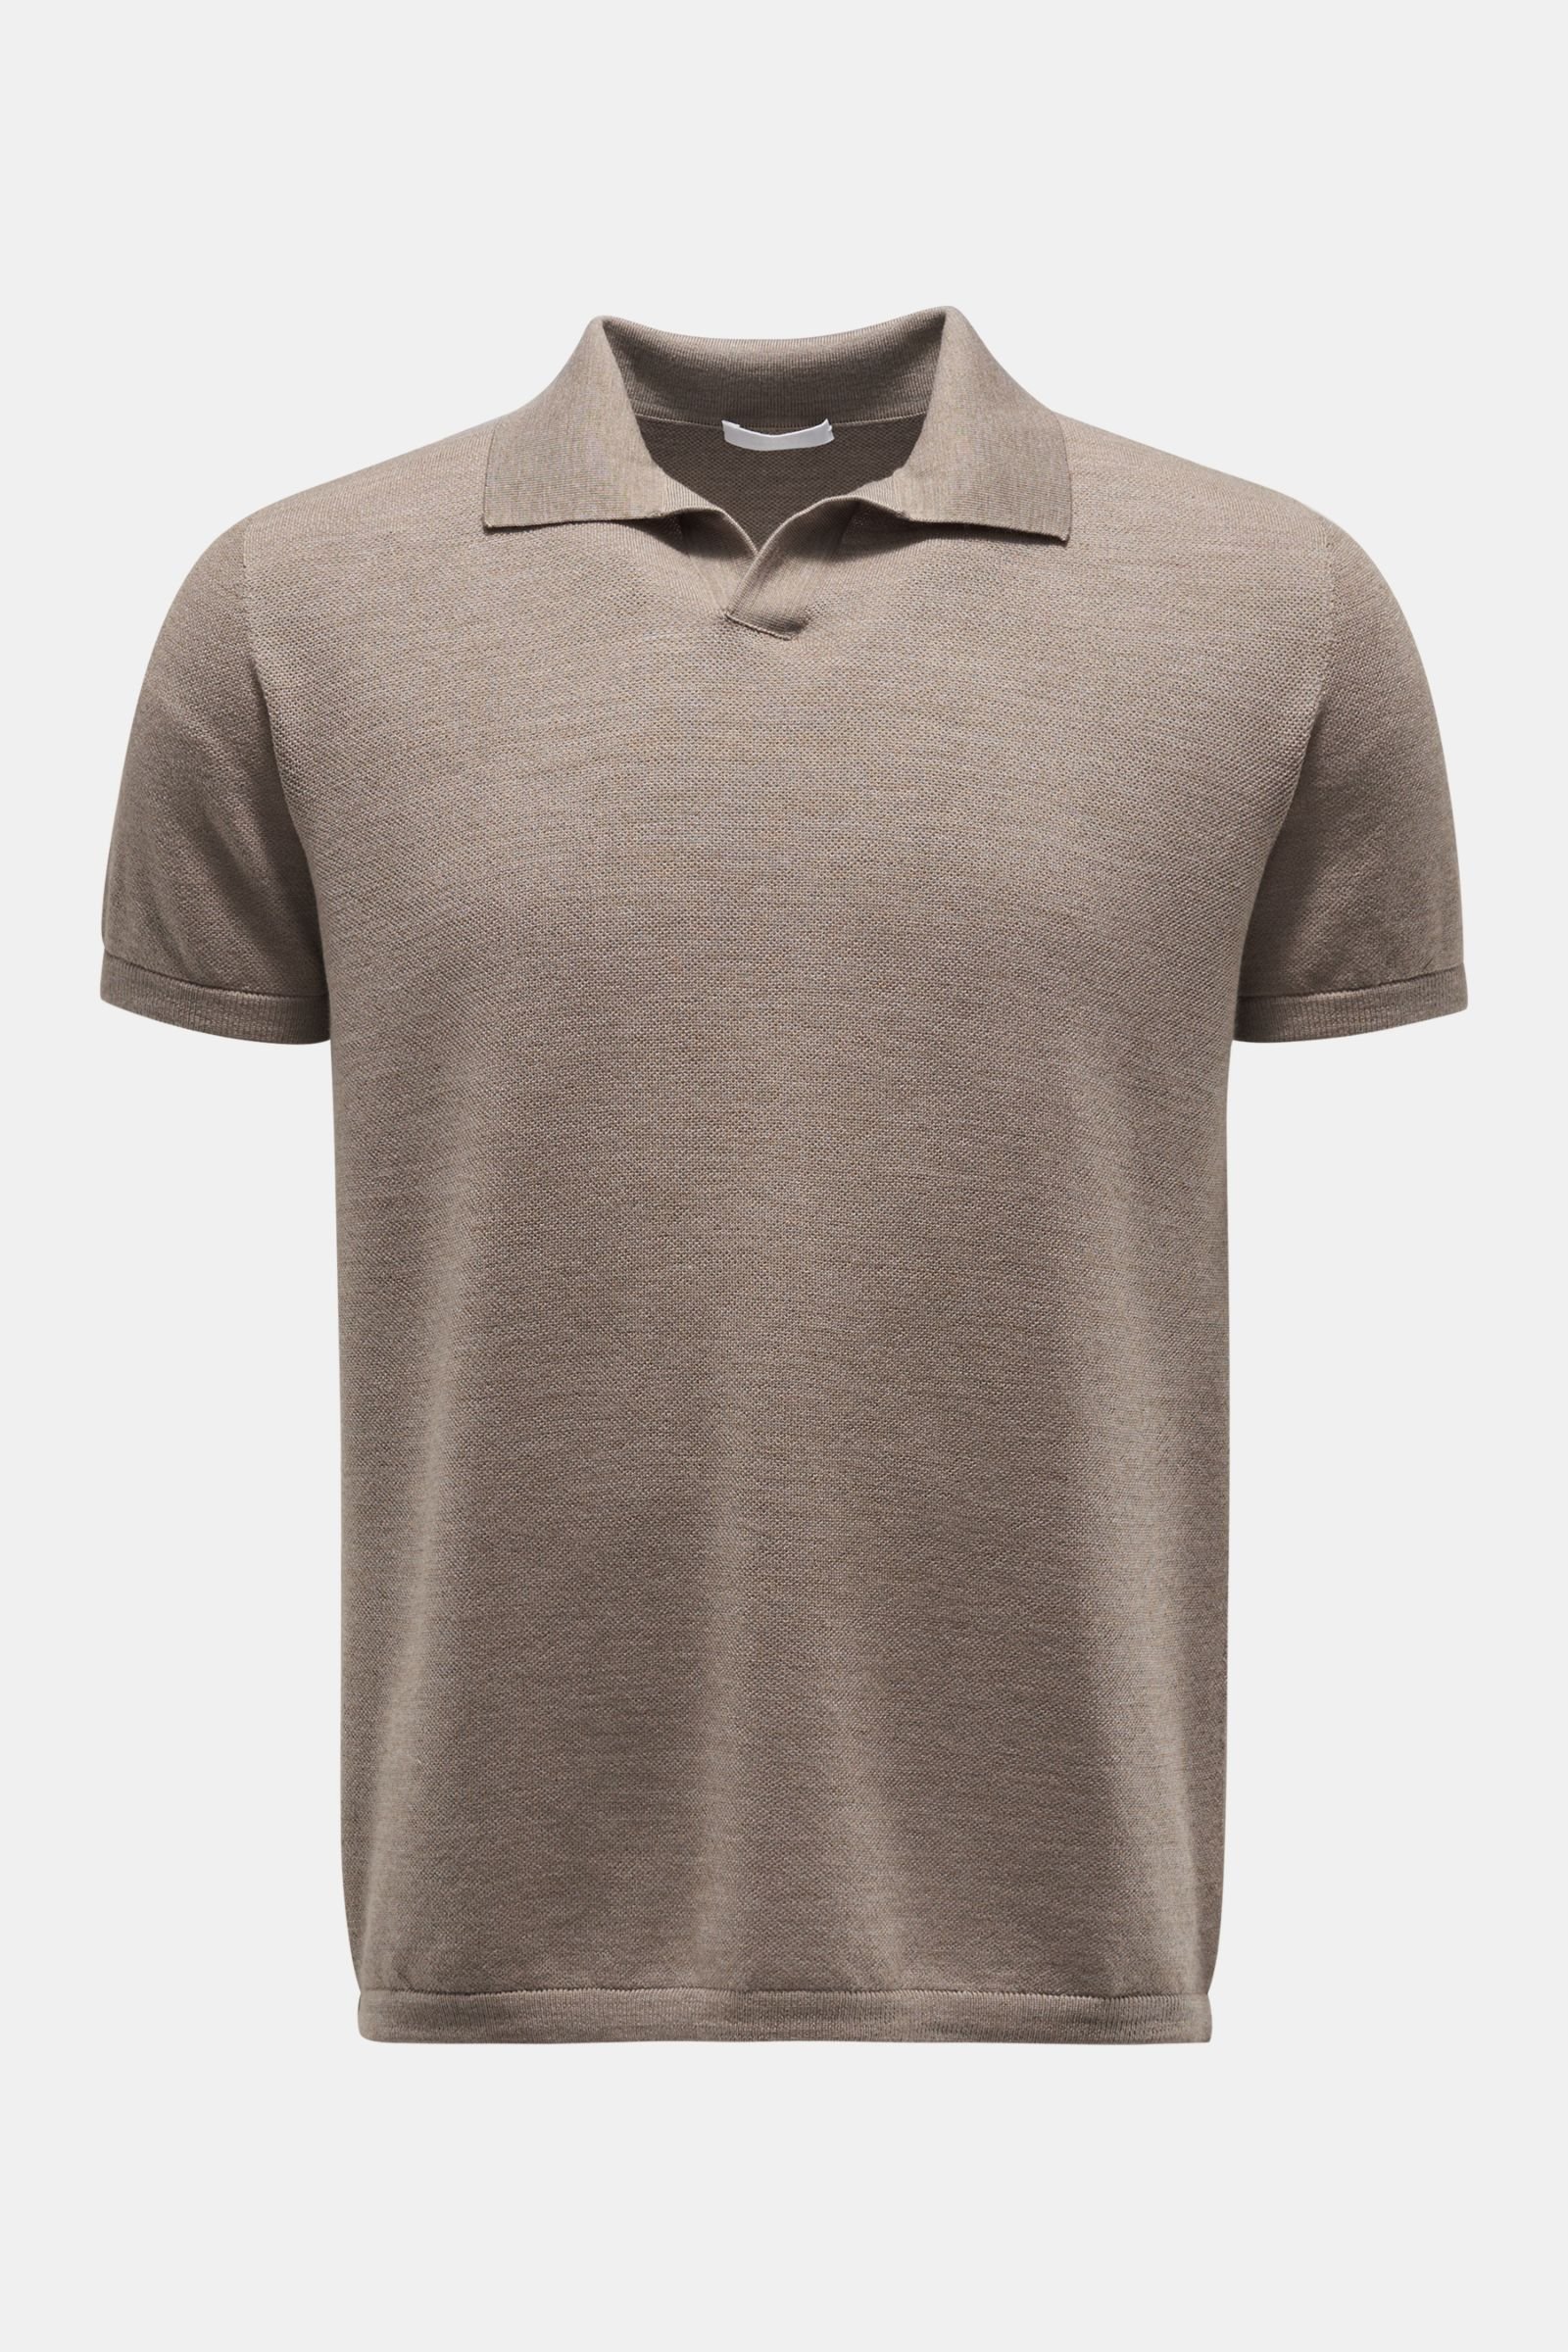 Short sleeve knit polo 'The Ultimate Polo' grey-brown